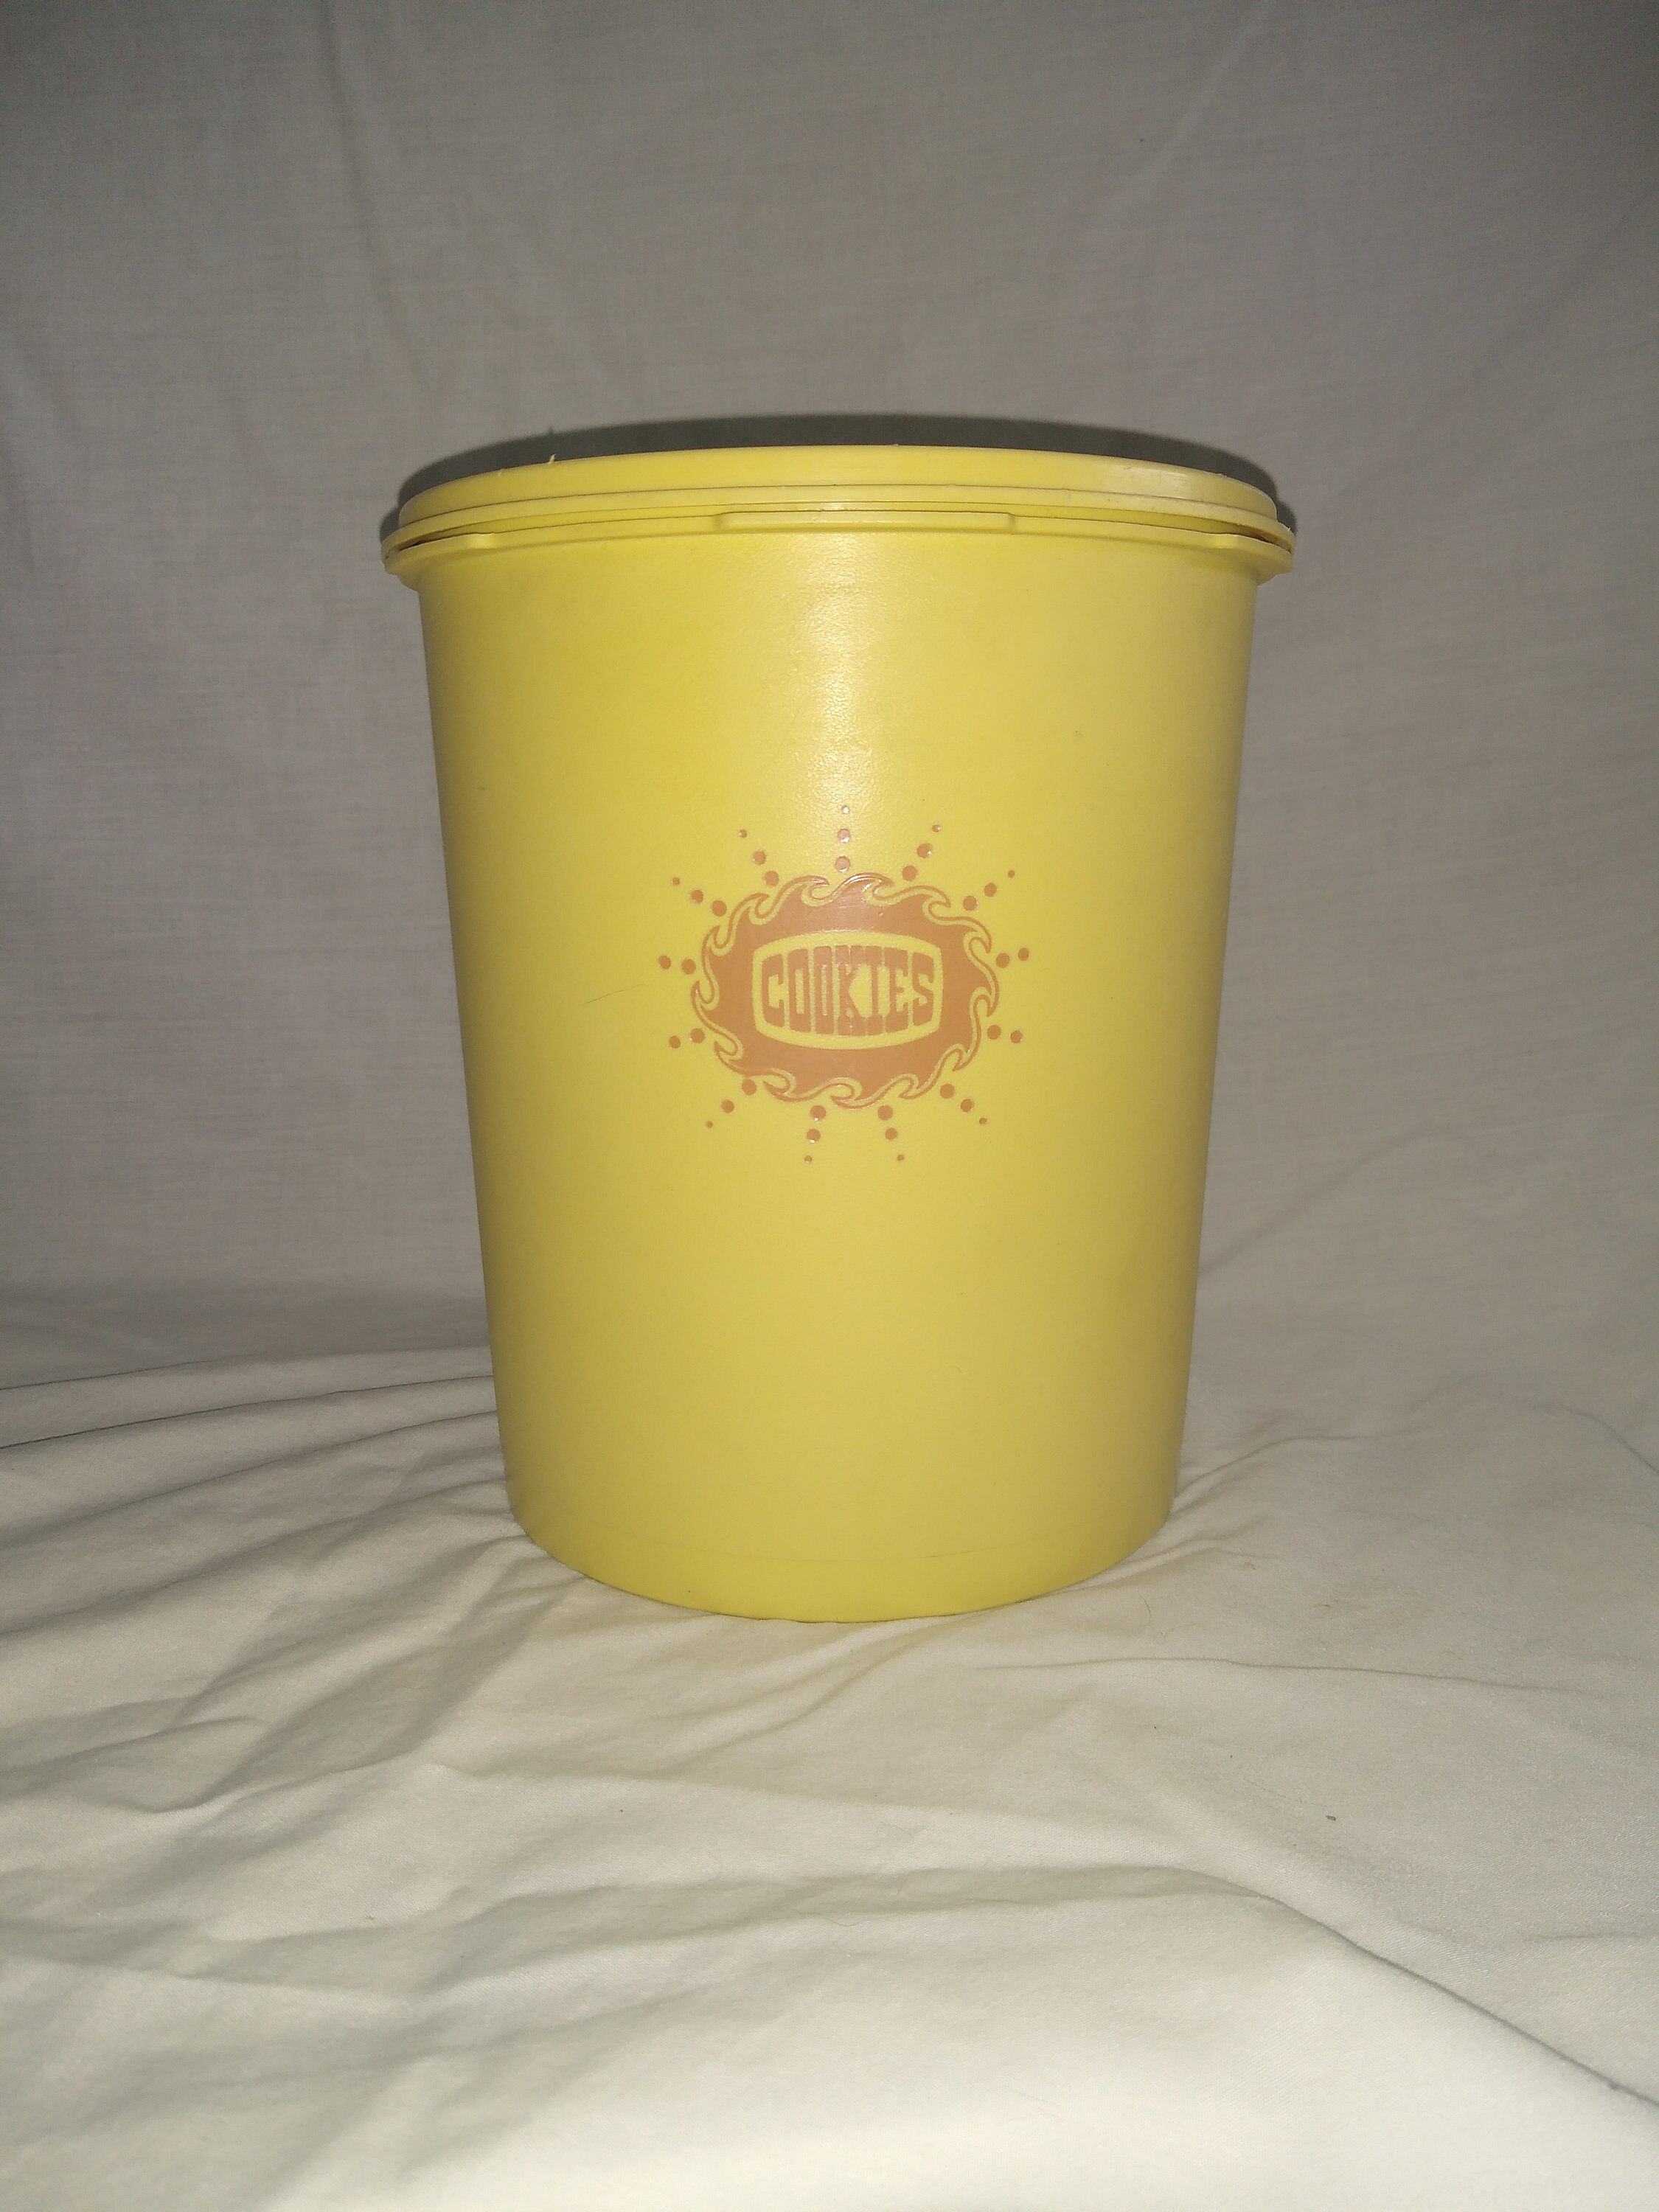 Vintage Tupperware Daffodil Yellow Mini Servalier Canisters- Set